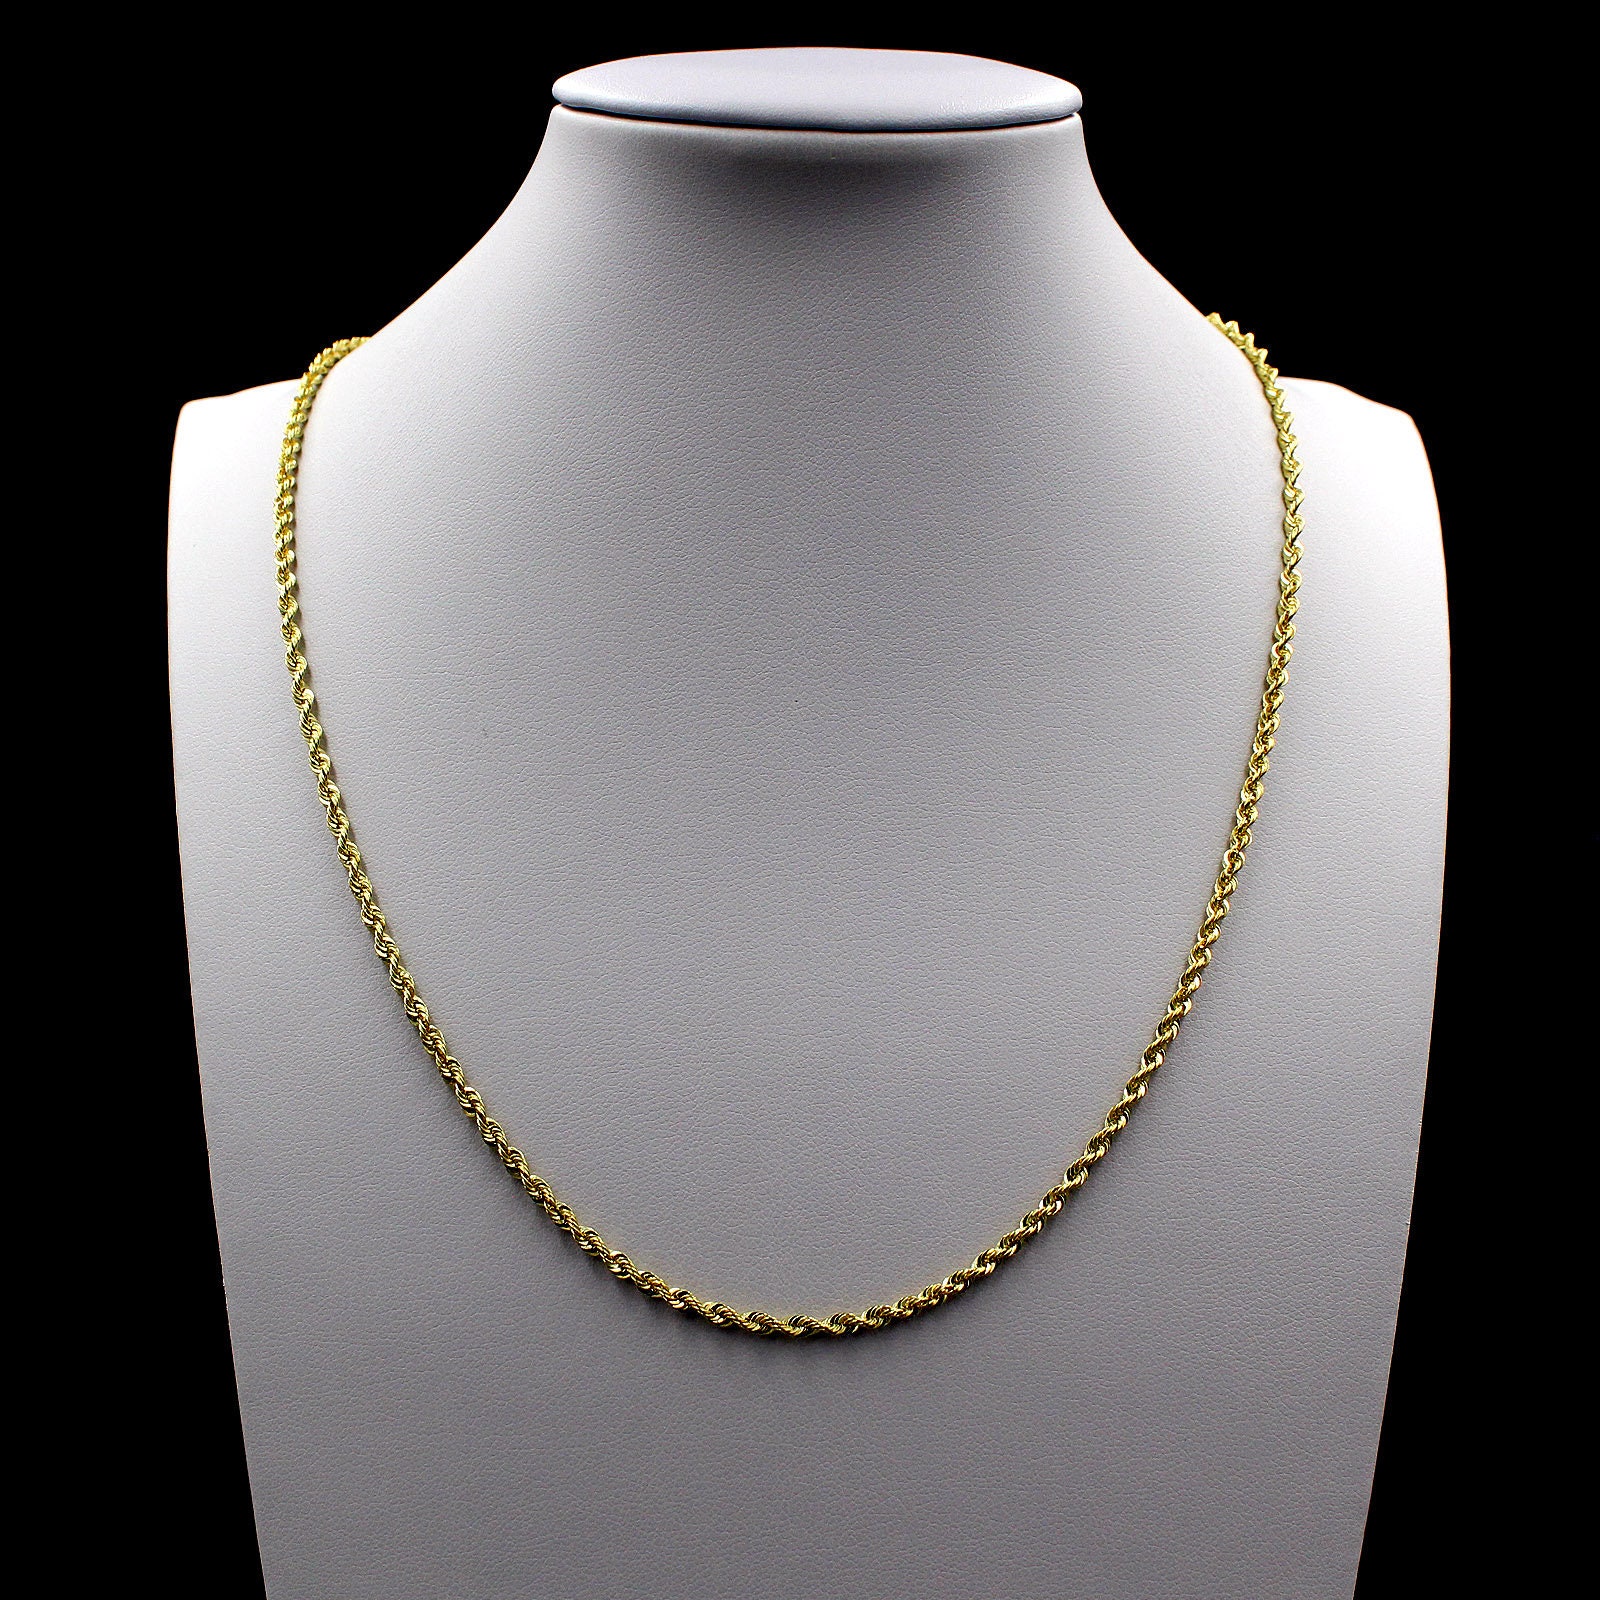 10K Yellow Gold Rope Chain Necklace 2mm 14 inch 16 inch 18 inch 20 inch 22 inch 24 inch 26 inch 28 inch 30 inch, Adult Unisex, Size: One Size